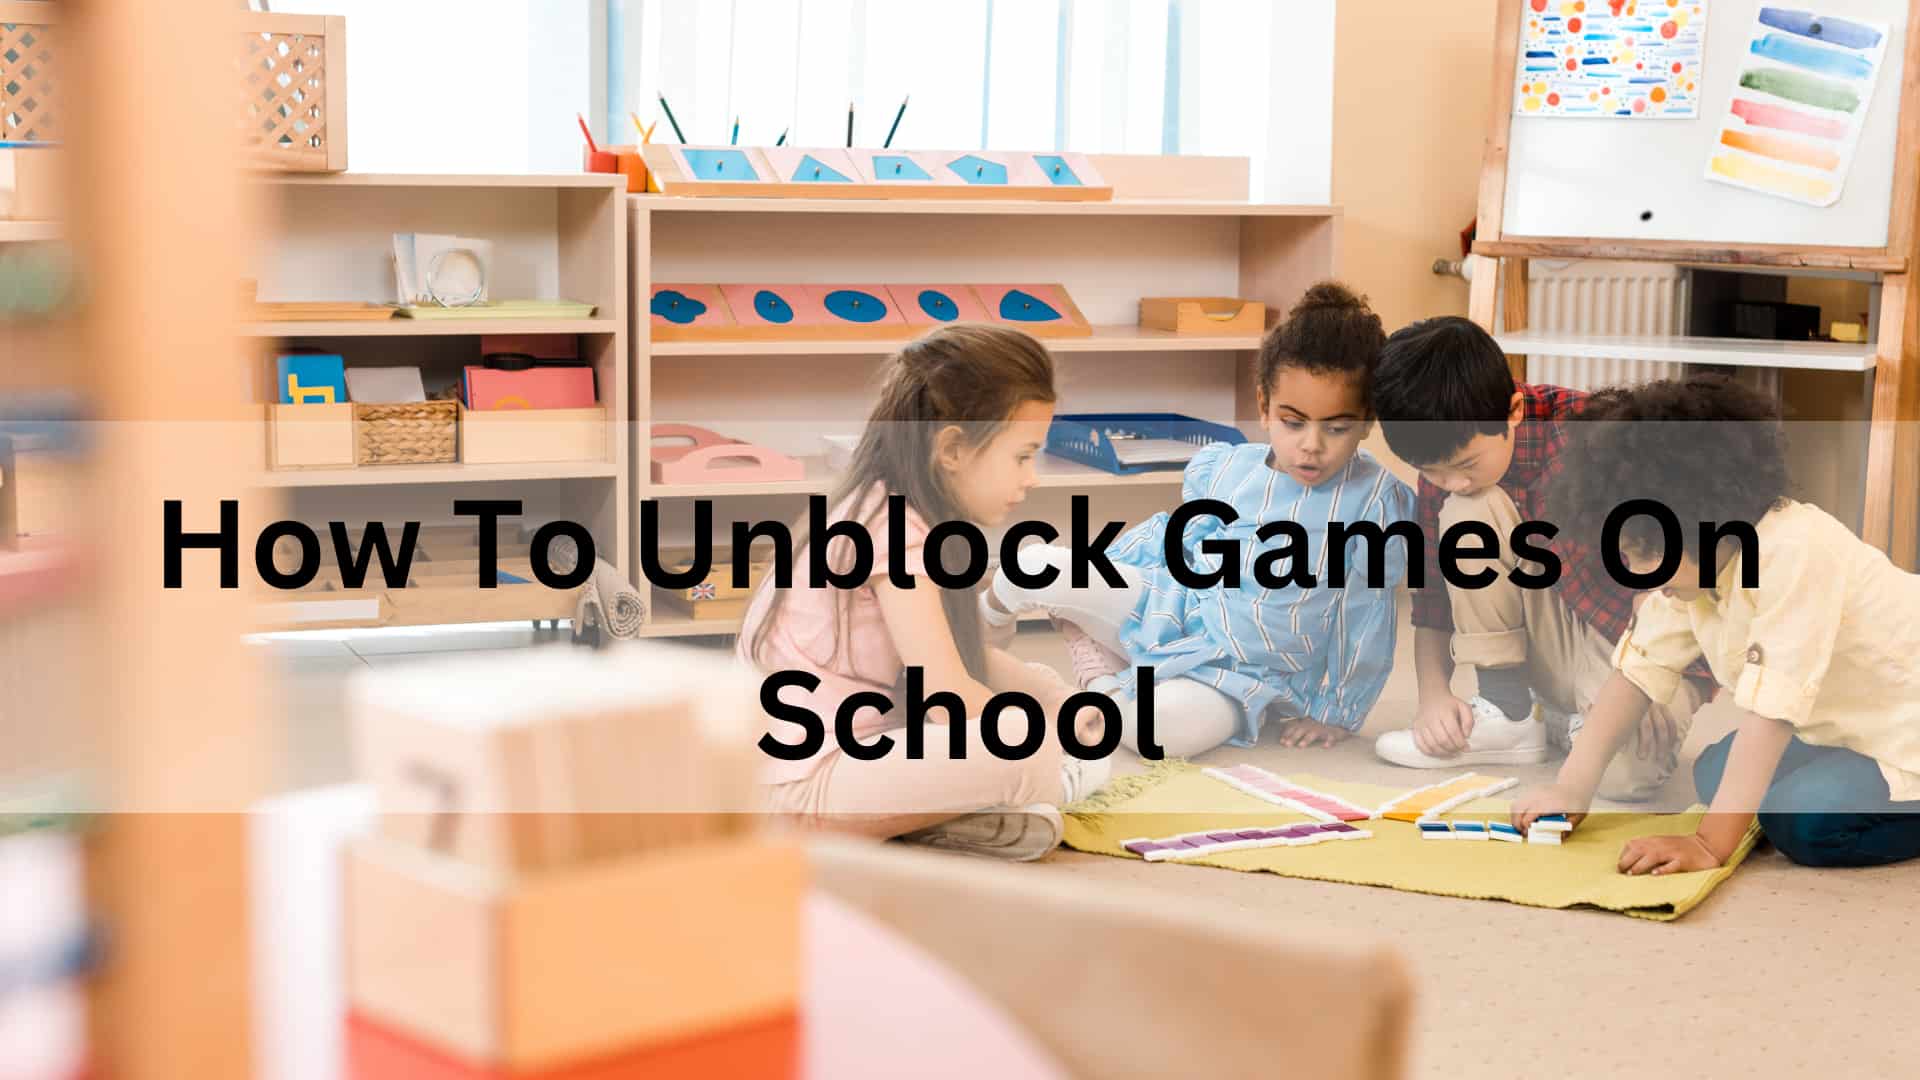 How To Unblock Games On School